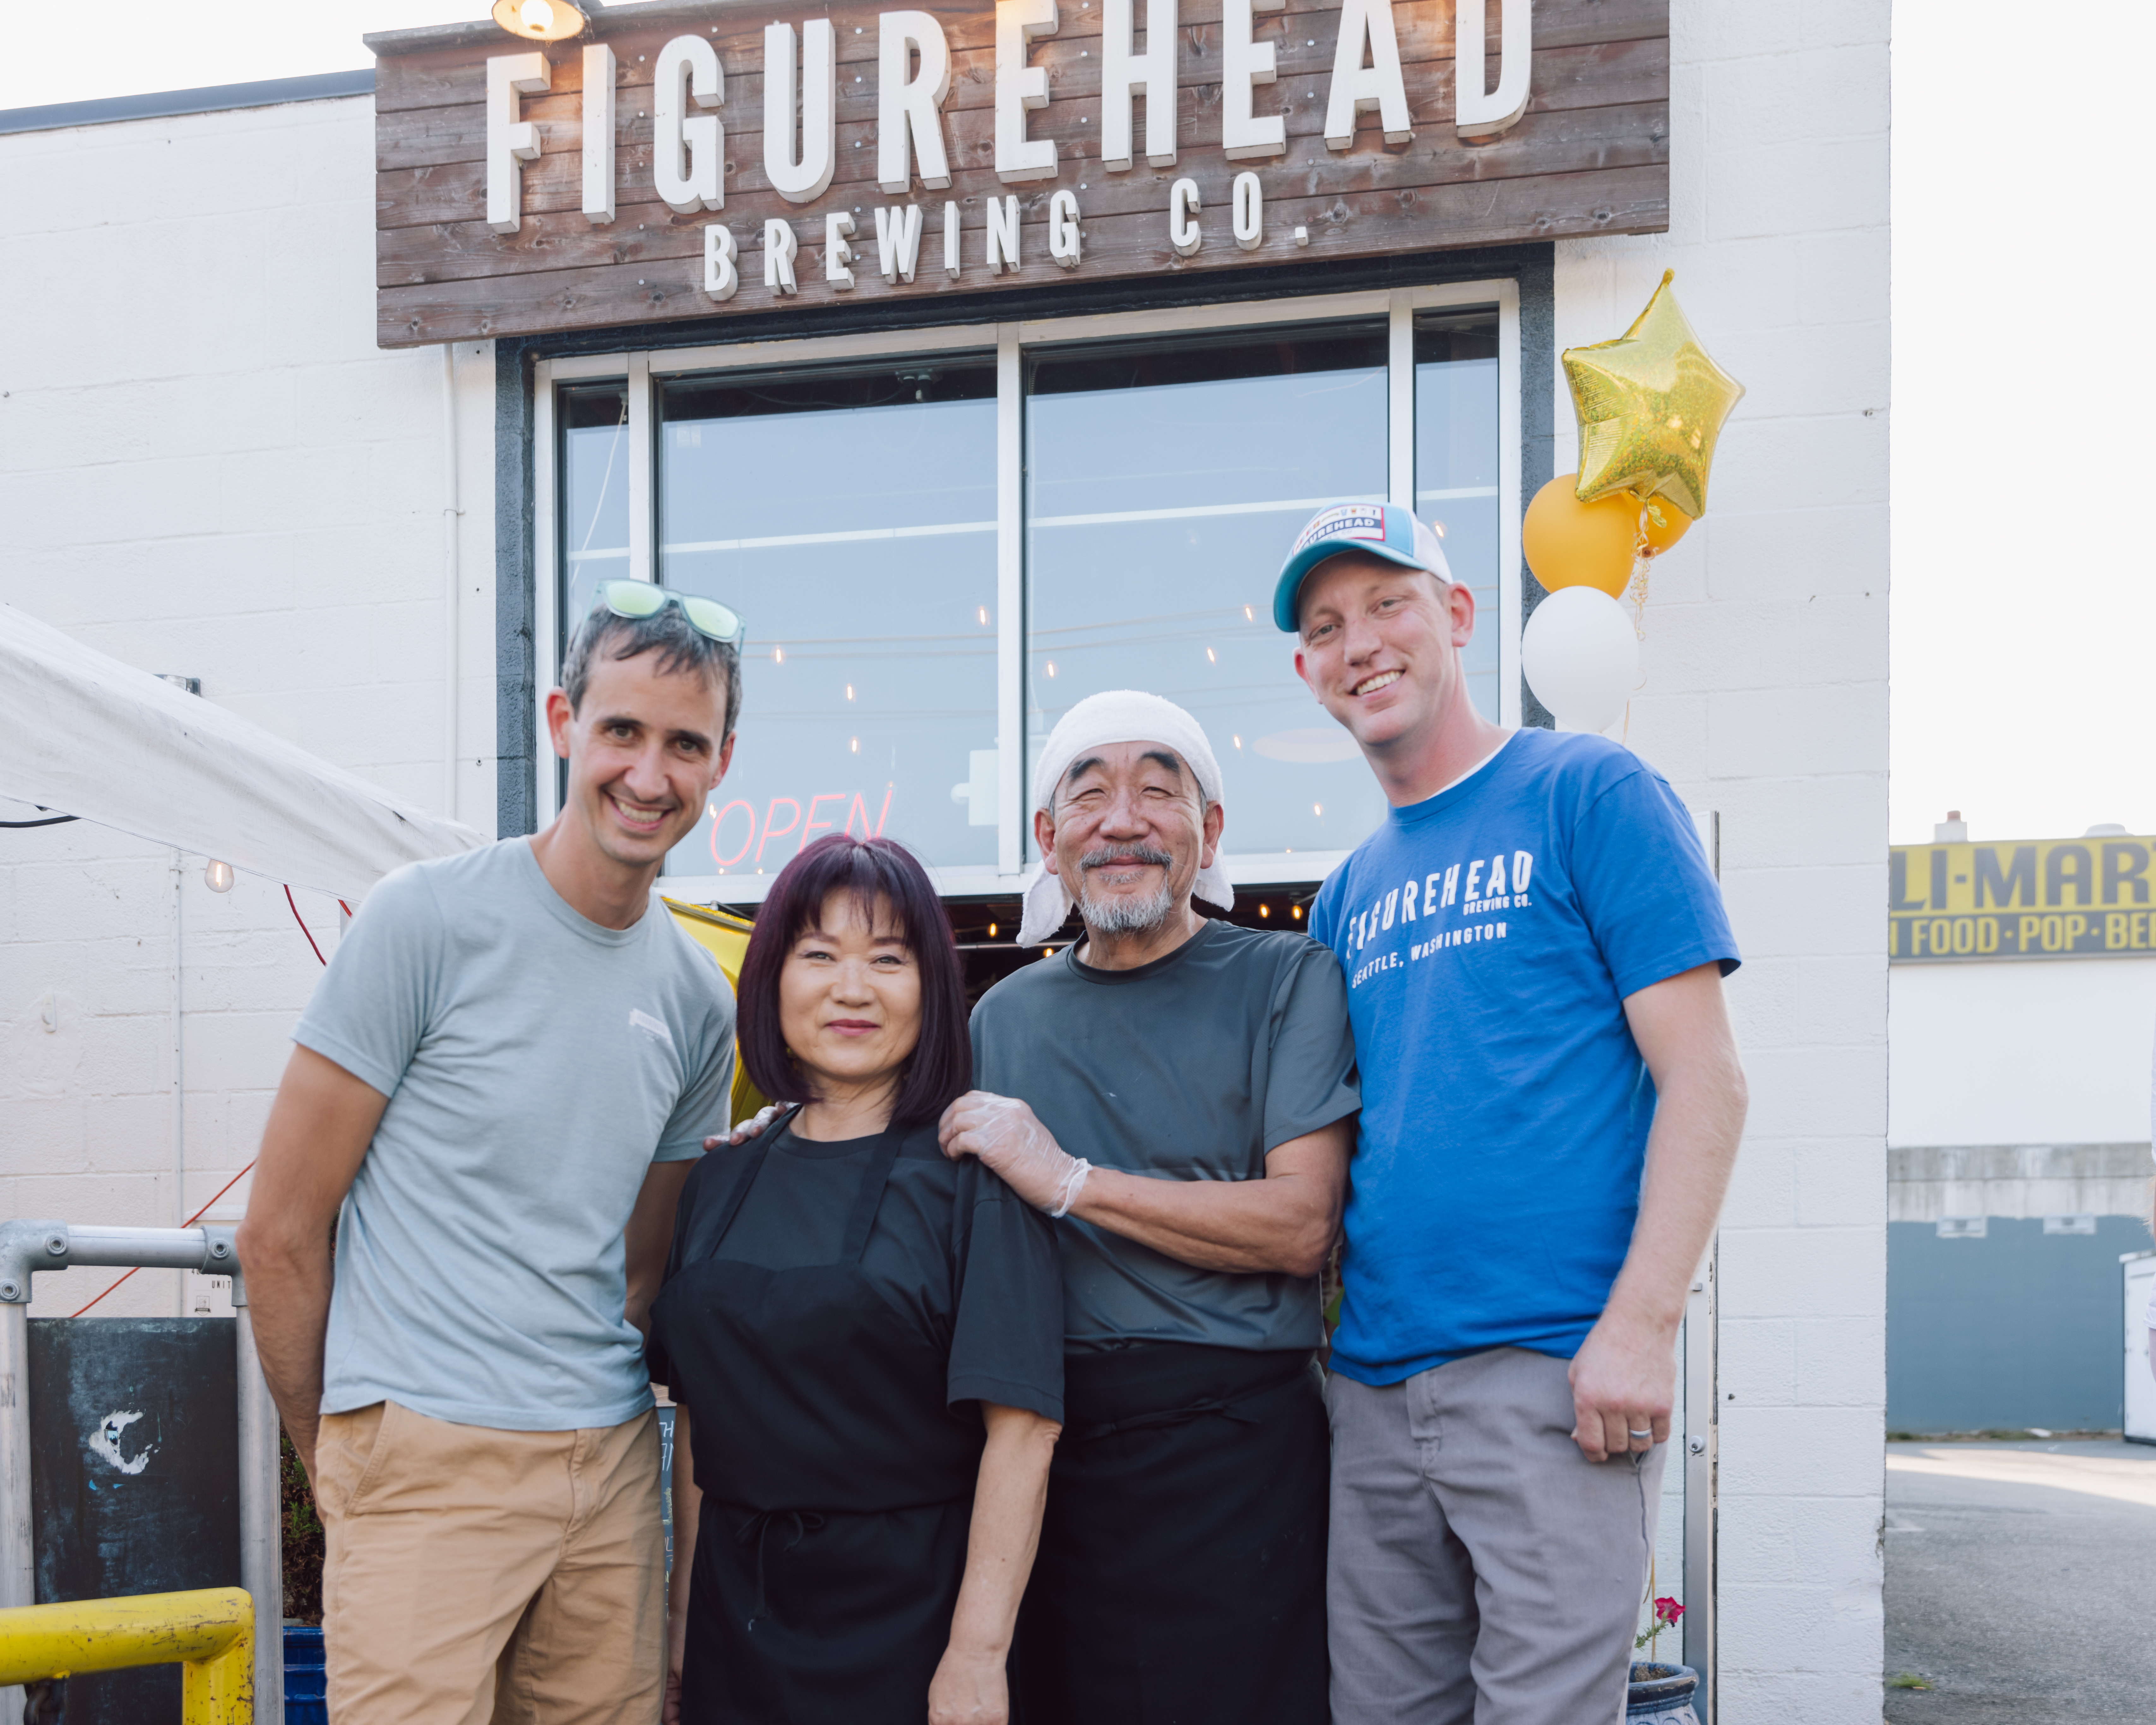 Two white men, an Asian man, and an Asian woman pose in front of a sign that says, “Figurehead Brewing Co.”